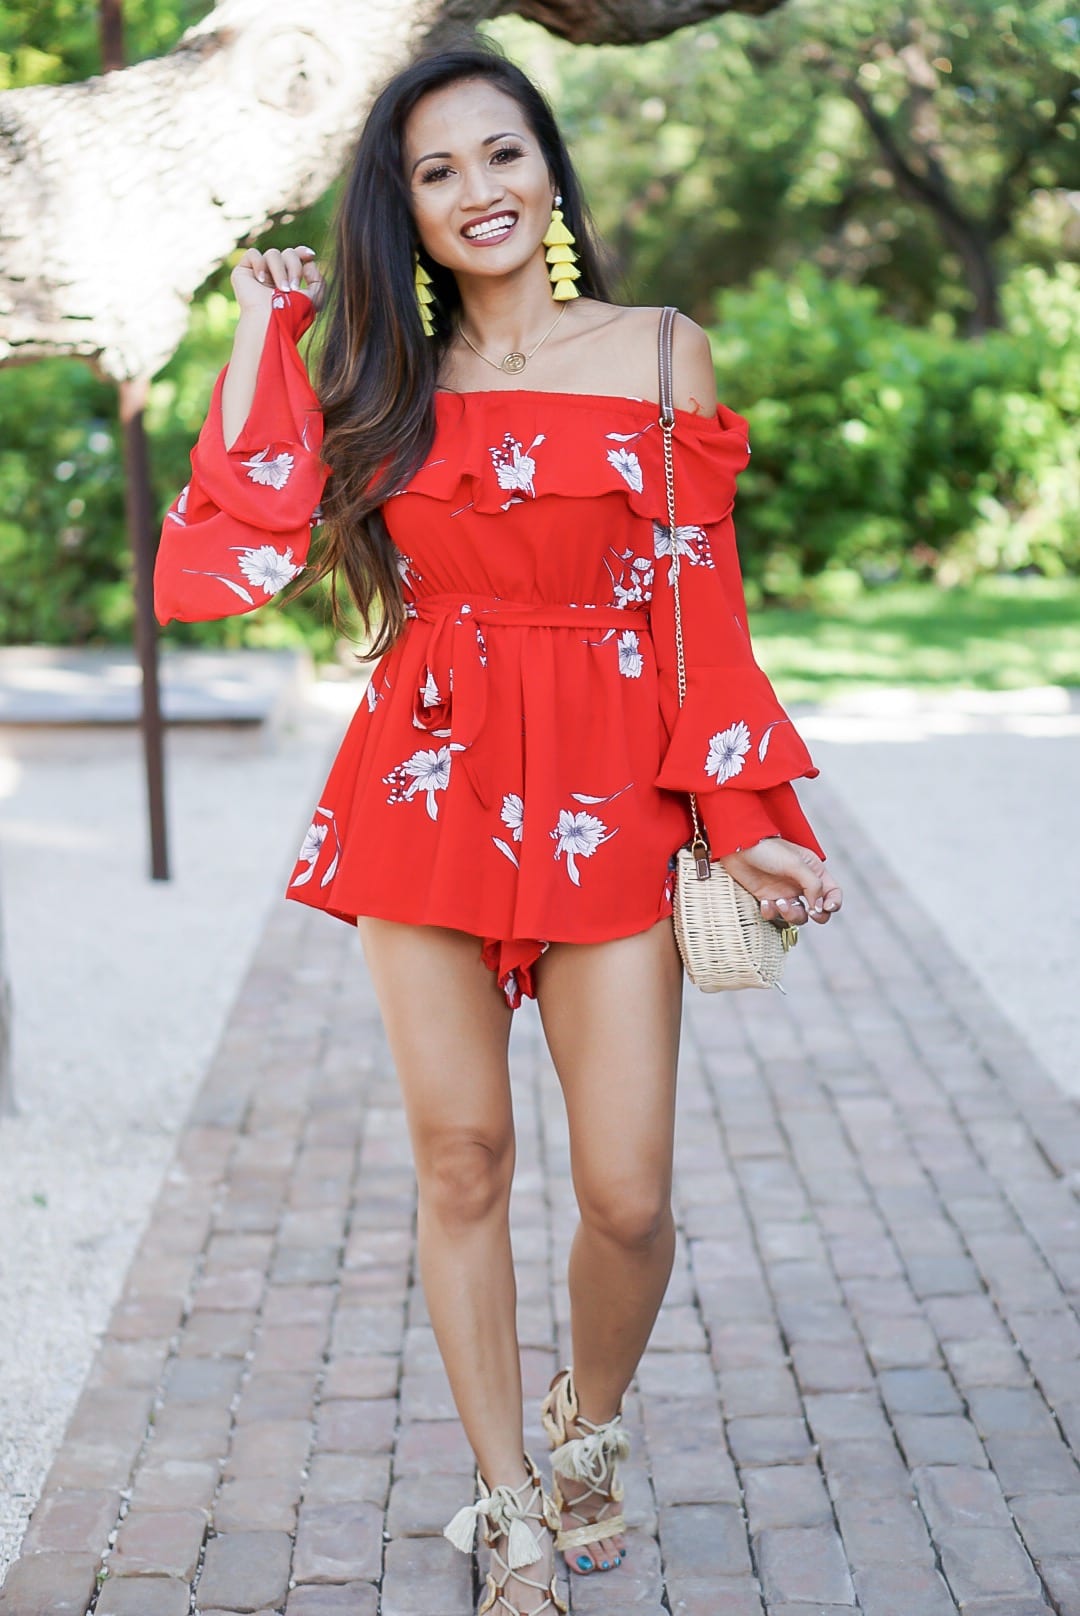 red romper, red floral romper, #summerstyle, #summeroutfit, #chicwish, #romper, off the shoulder, networking, tips on networking, liketoknow.it, yellow tassel earrings, lace up sandals